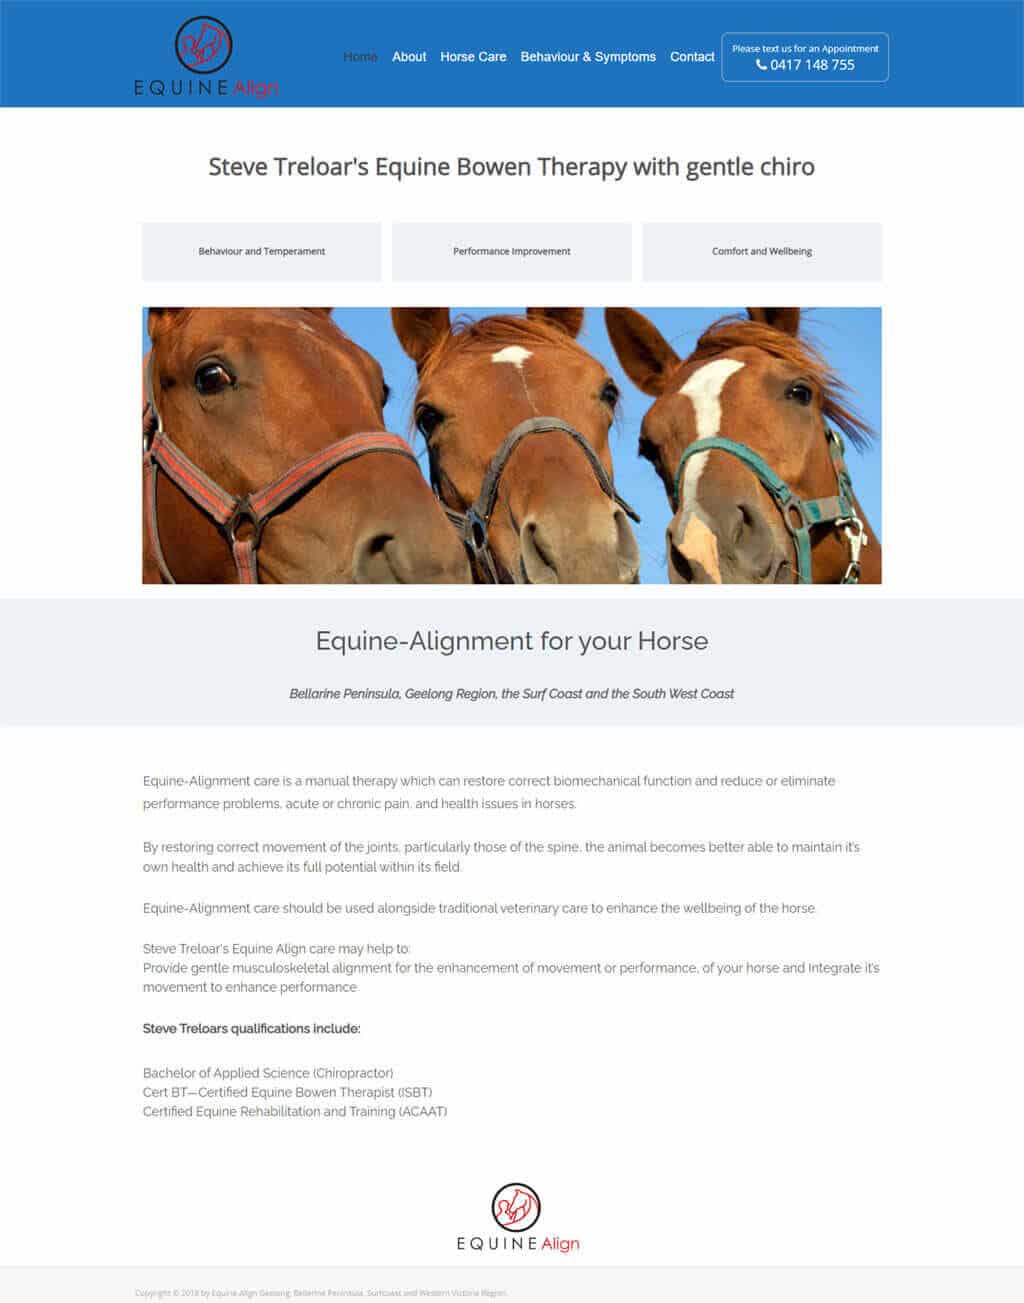 Website Designed for Steve Treloar, former Chiropractor now working happily with horses